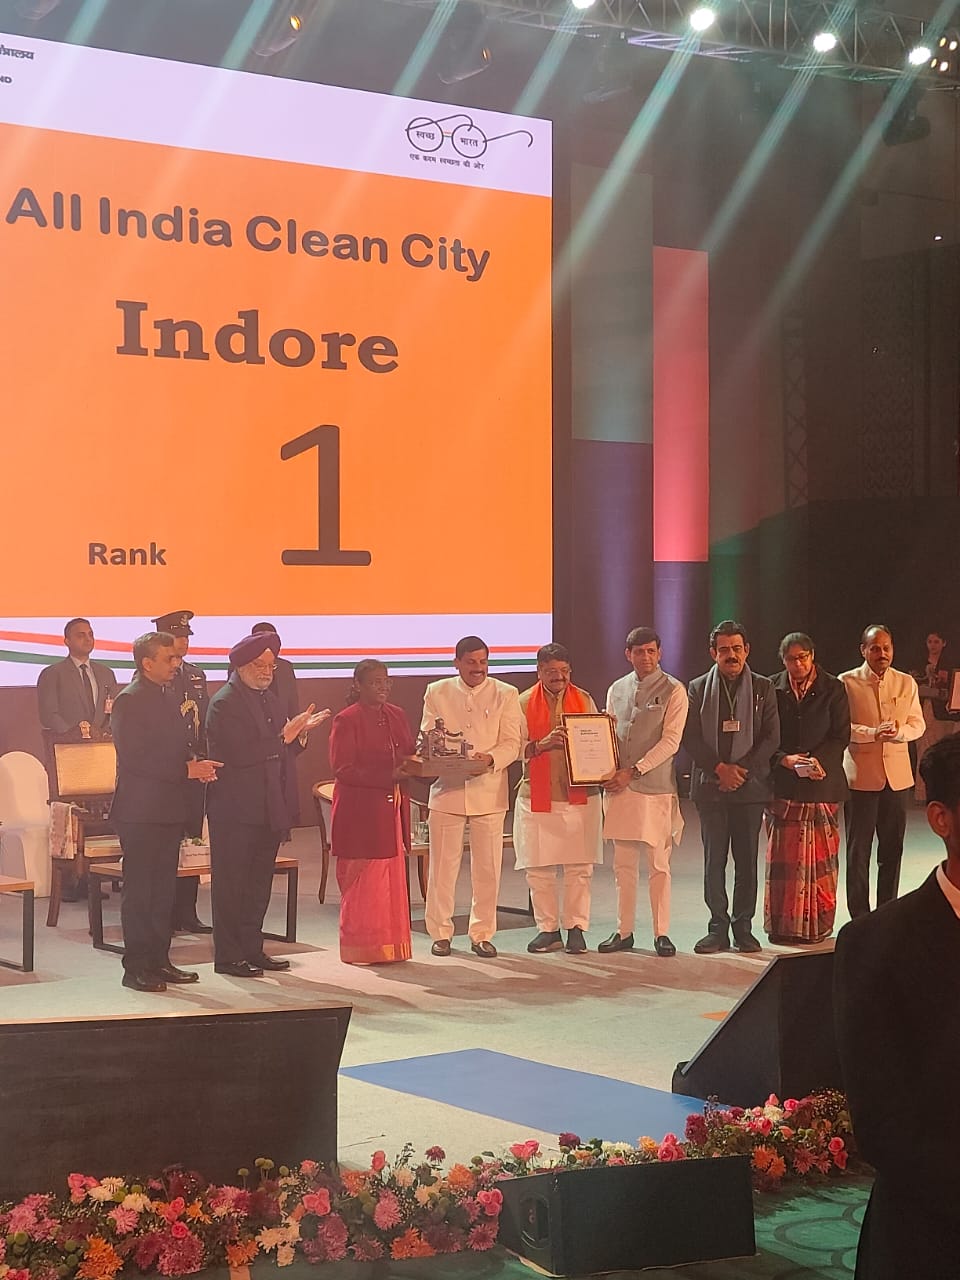 Indore Again Number One in Cleanliness